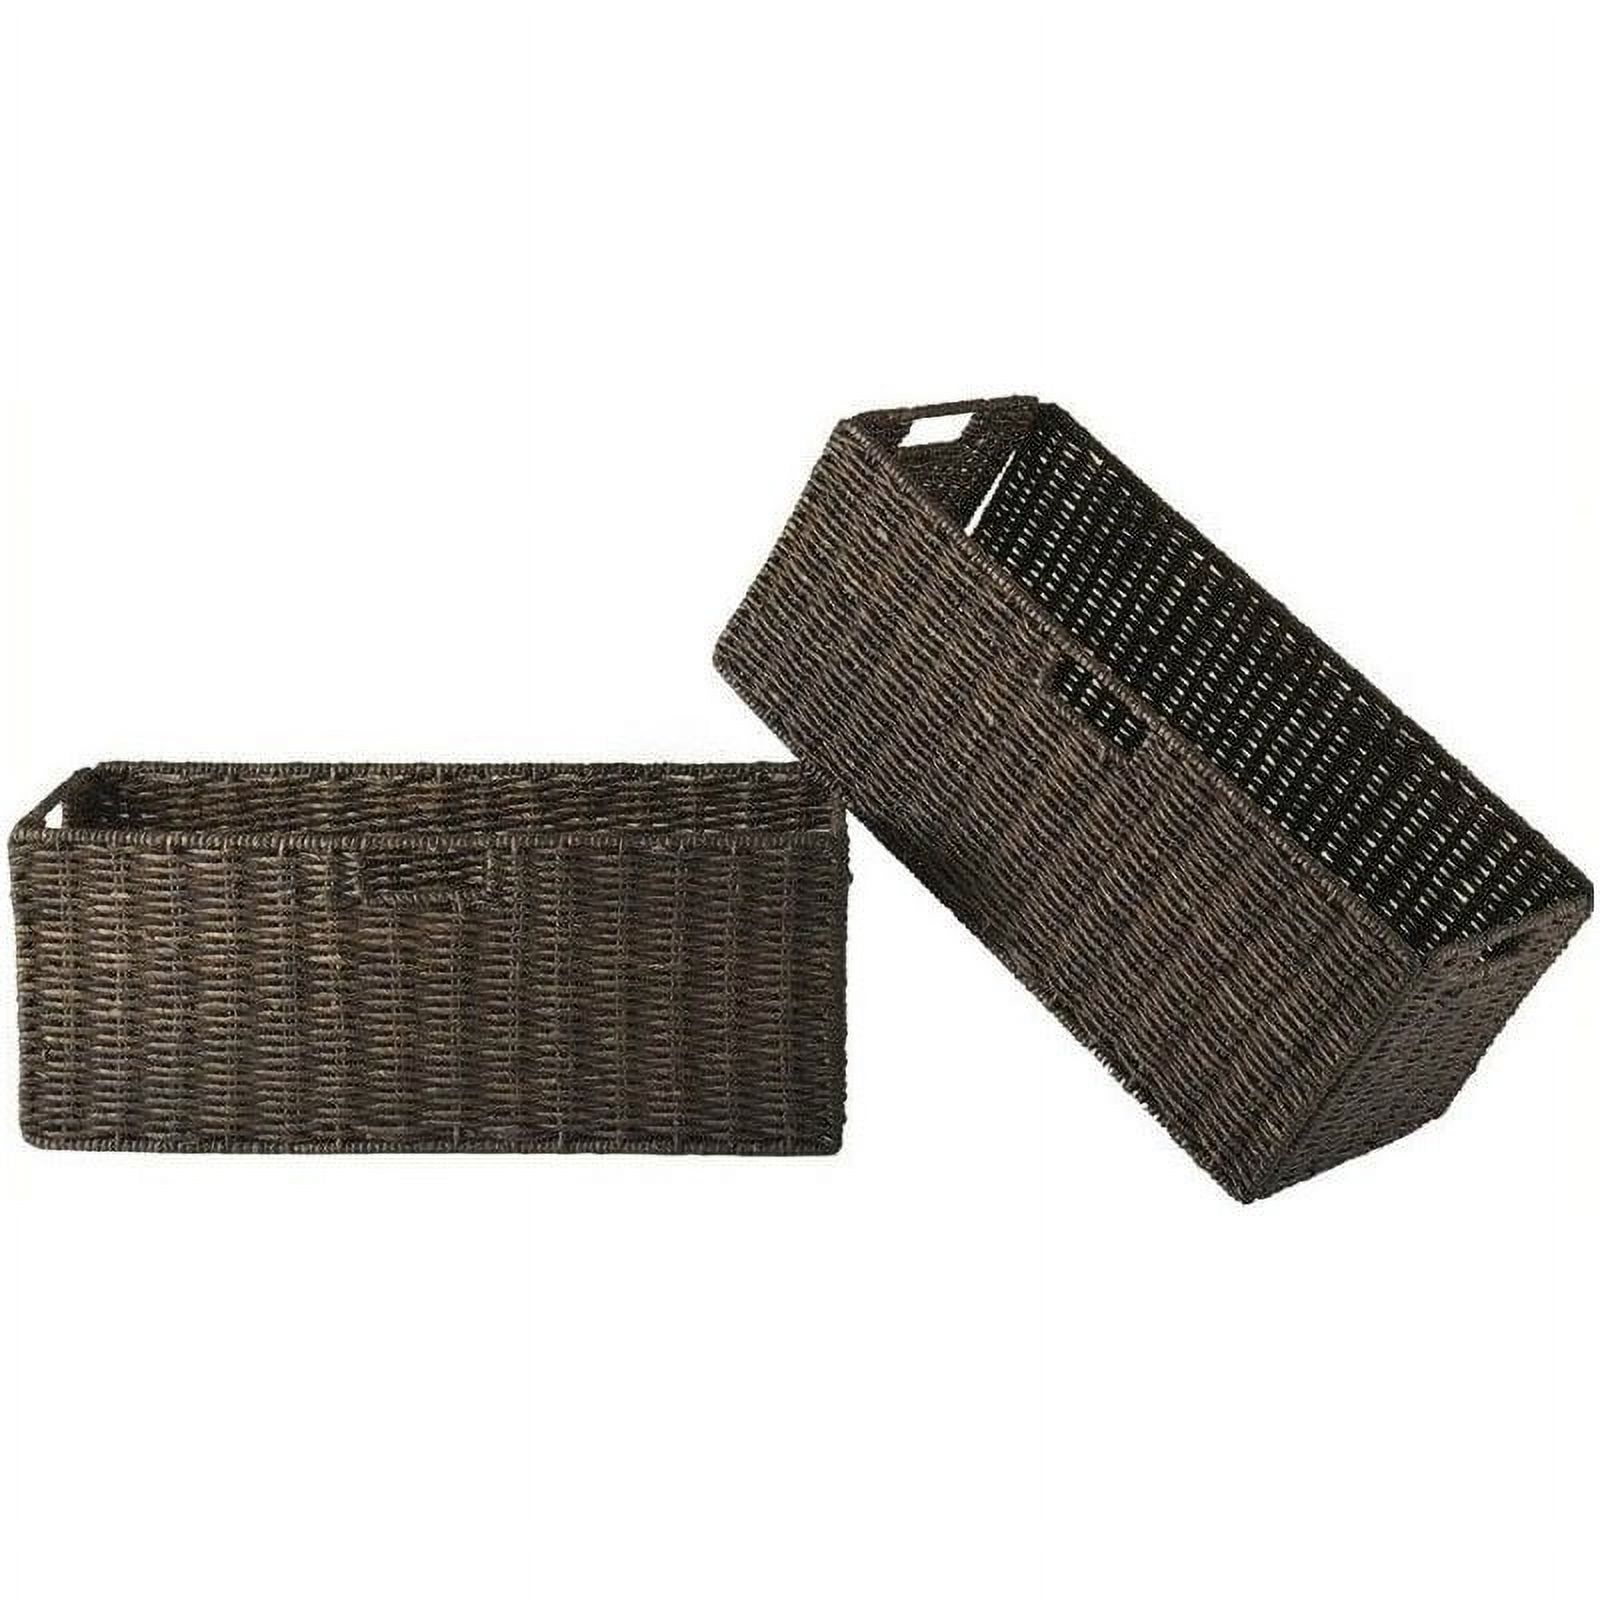 Winsome Wood Granville 2-Pc Foldable Large Baskets, Chocolate Corn Husk - image 1 of 2